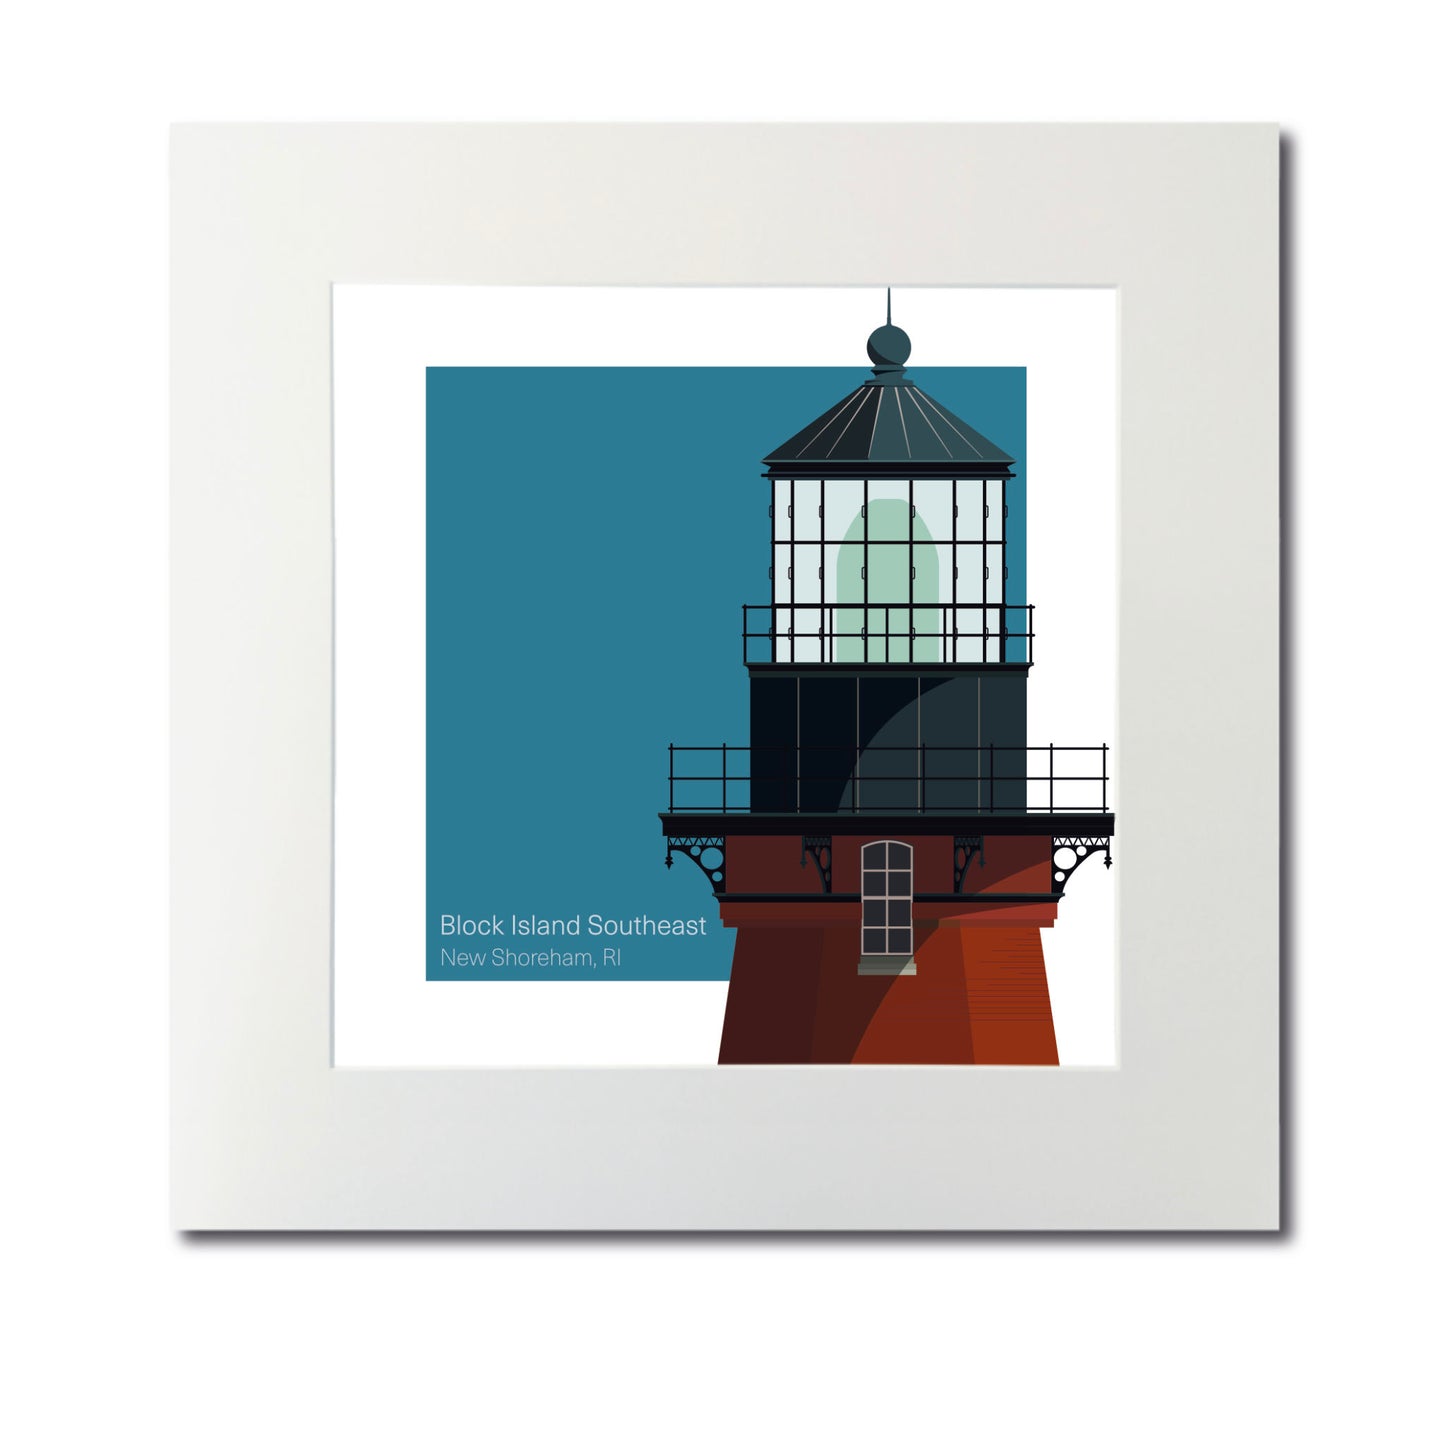 Illustration of the Block Island Southeast lighthouse, RI, USA. On a white background with aqua blue square as a backdrop., mounted and measuring 12"x12" (30x30cm).